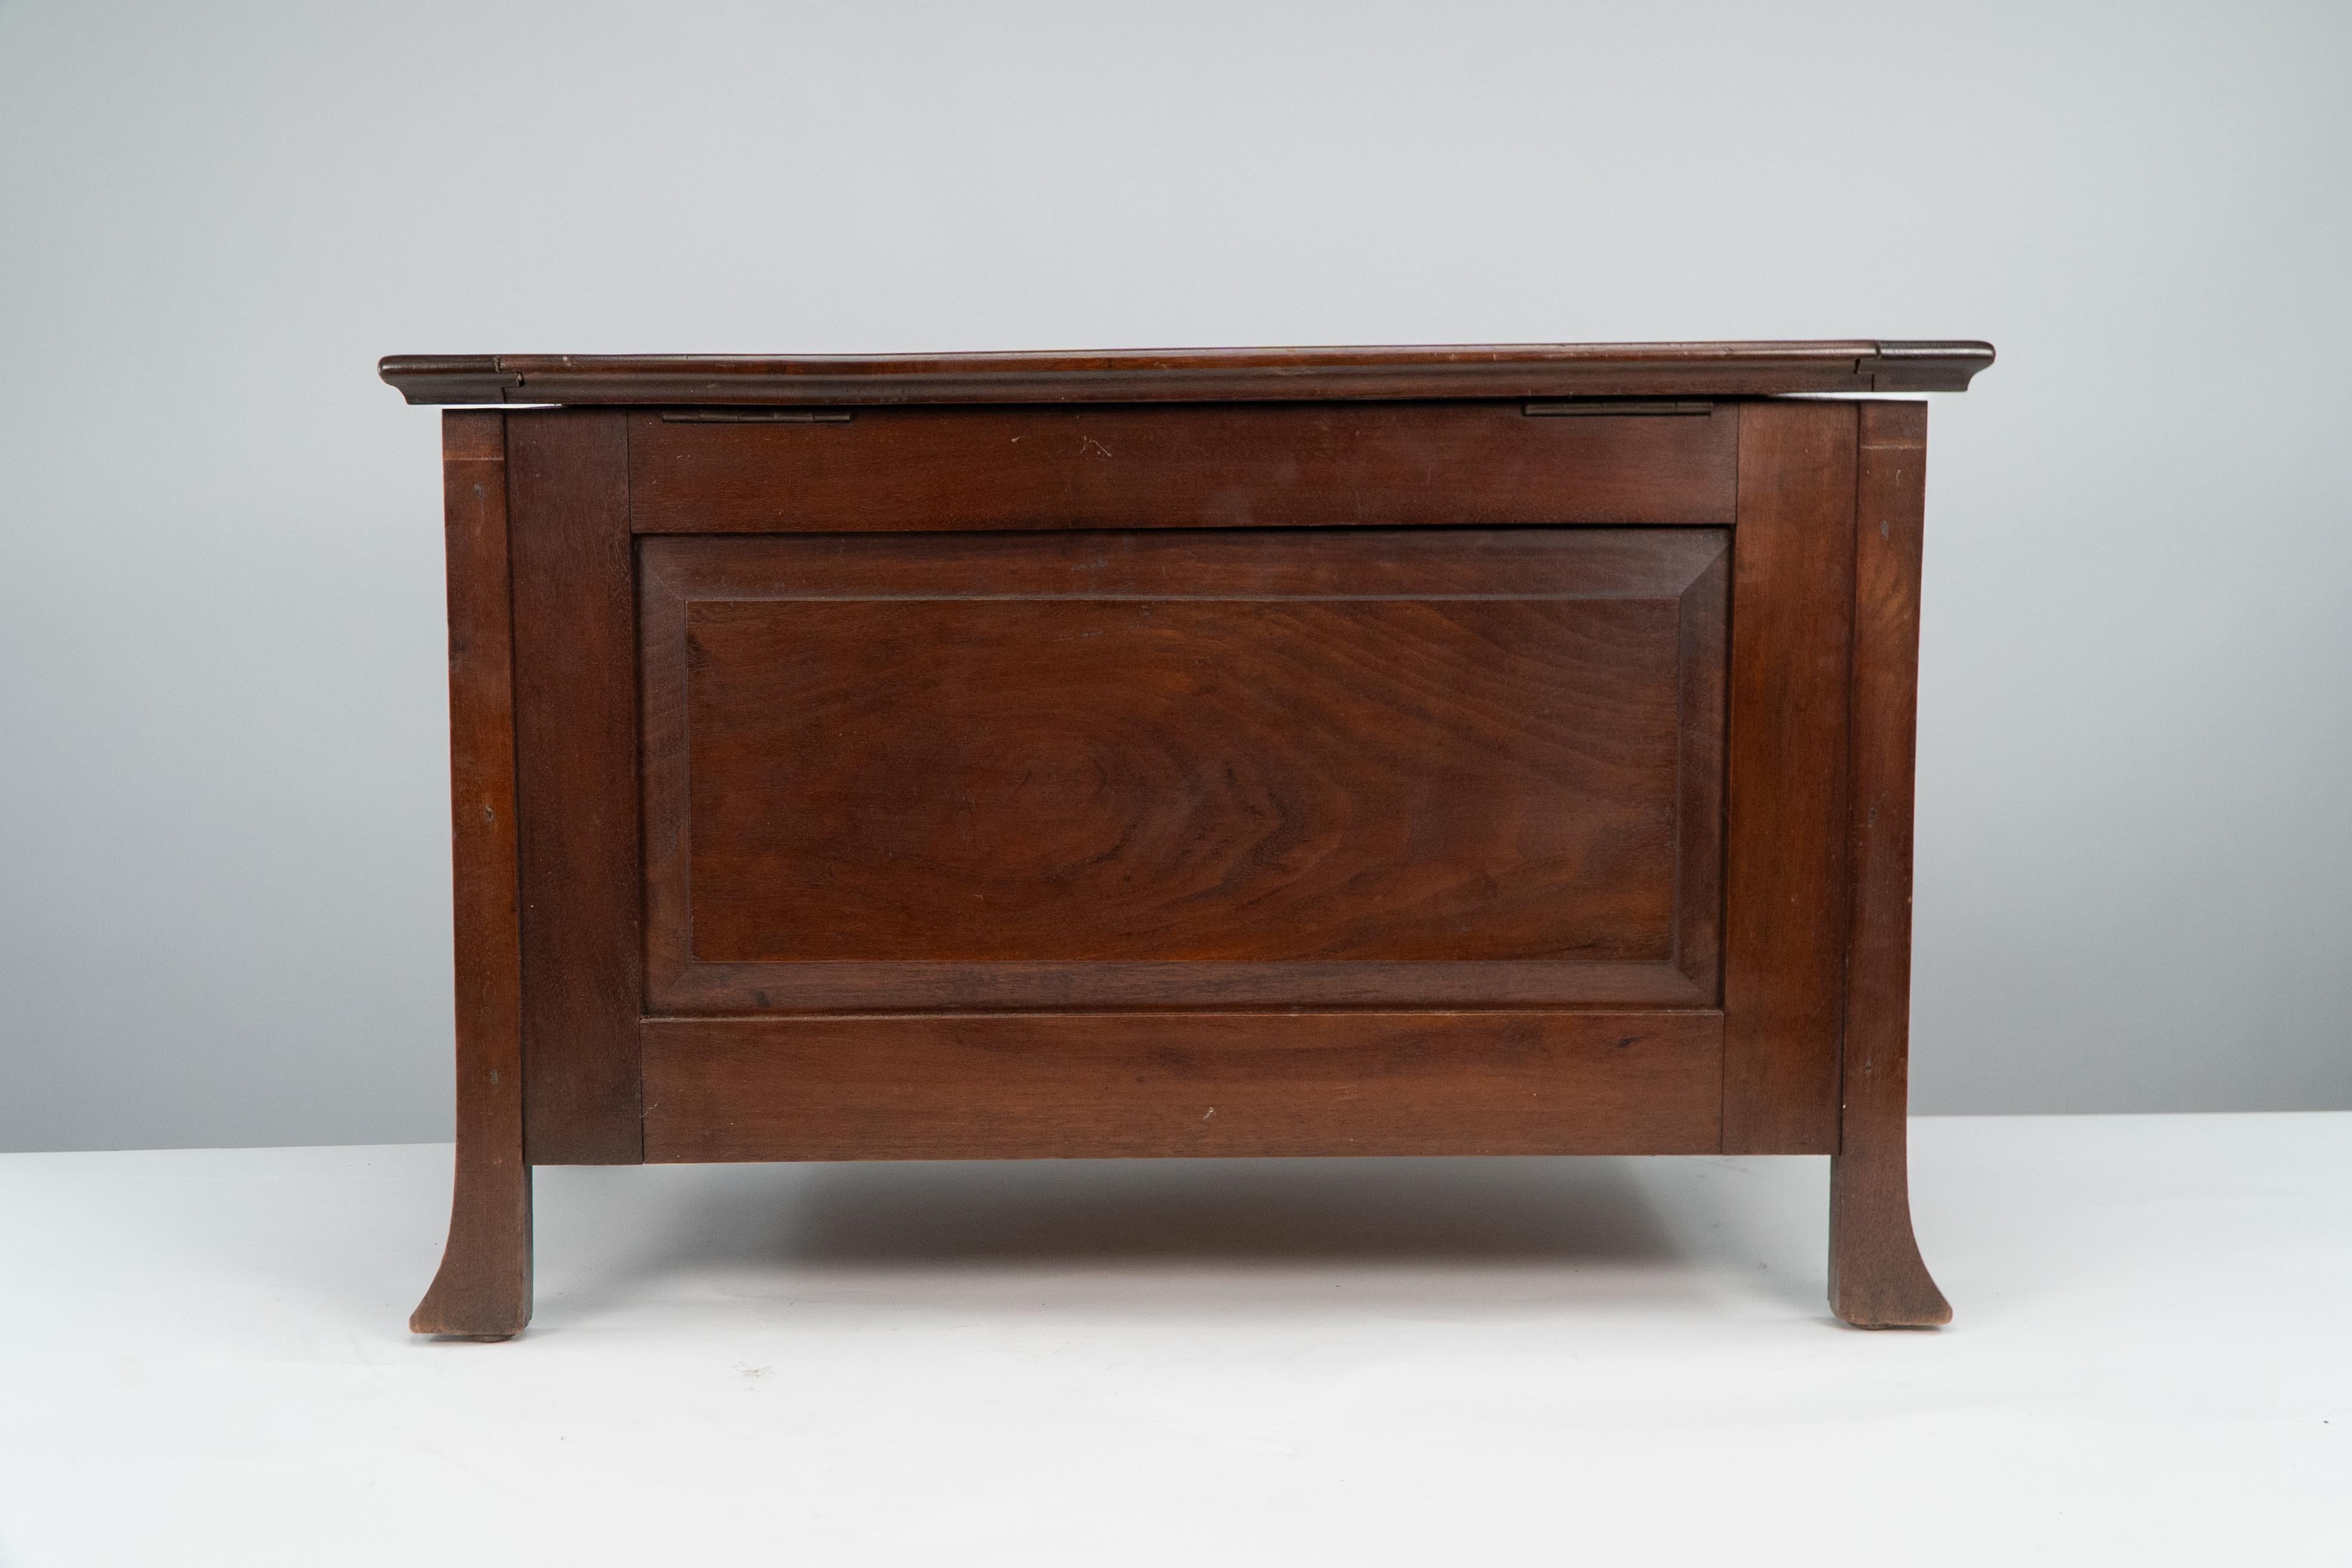 English Liberty and Co. A small trunk with copper panels in the style of C R Mackintosh. For Sale